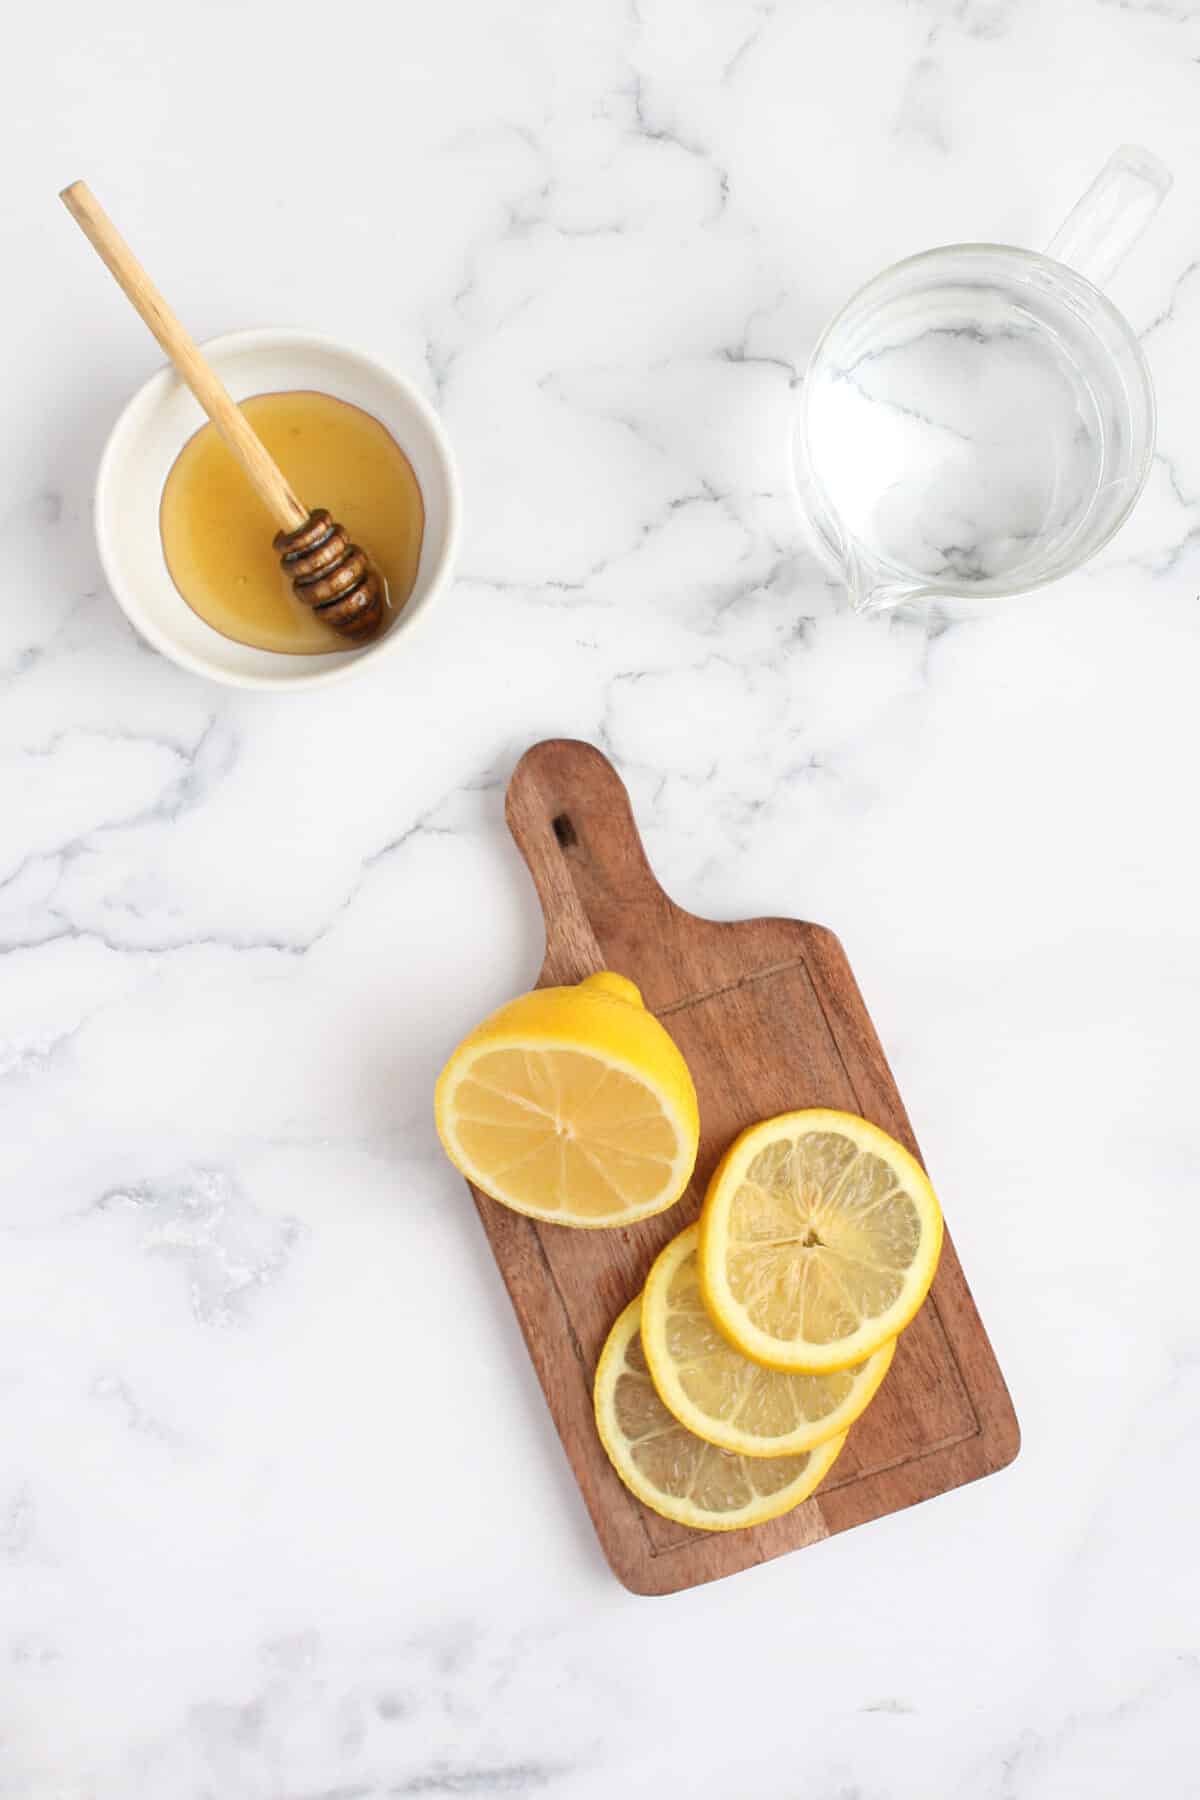 Ingredients for cold remedy with honey and lemon.